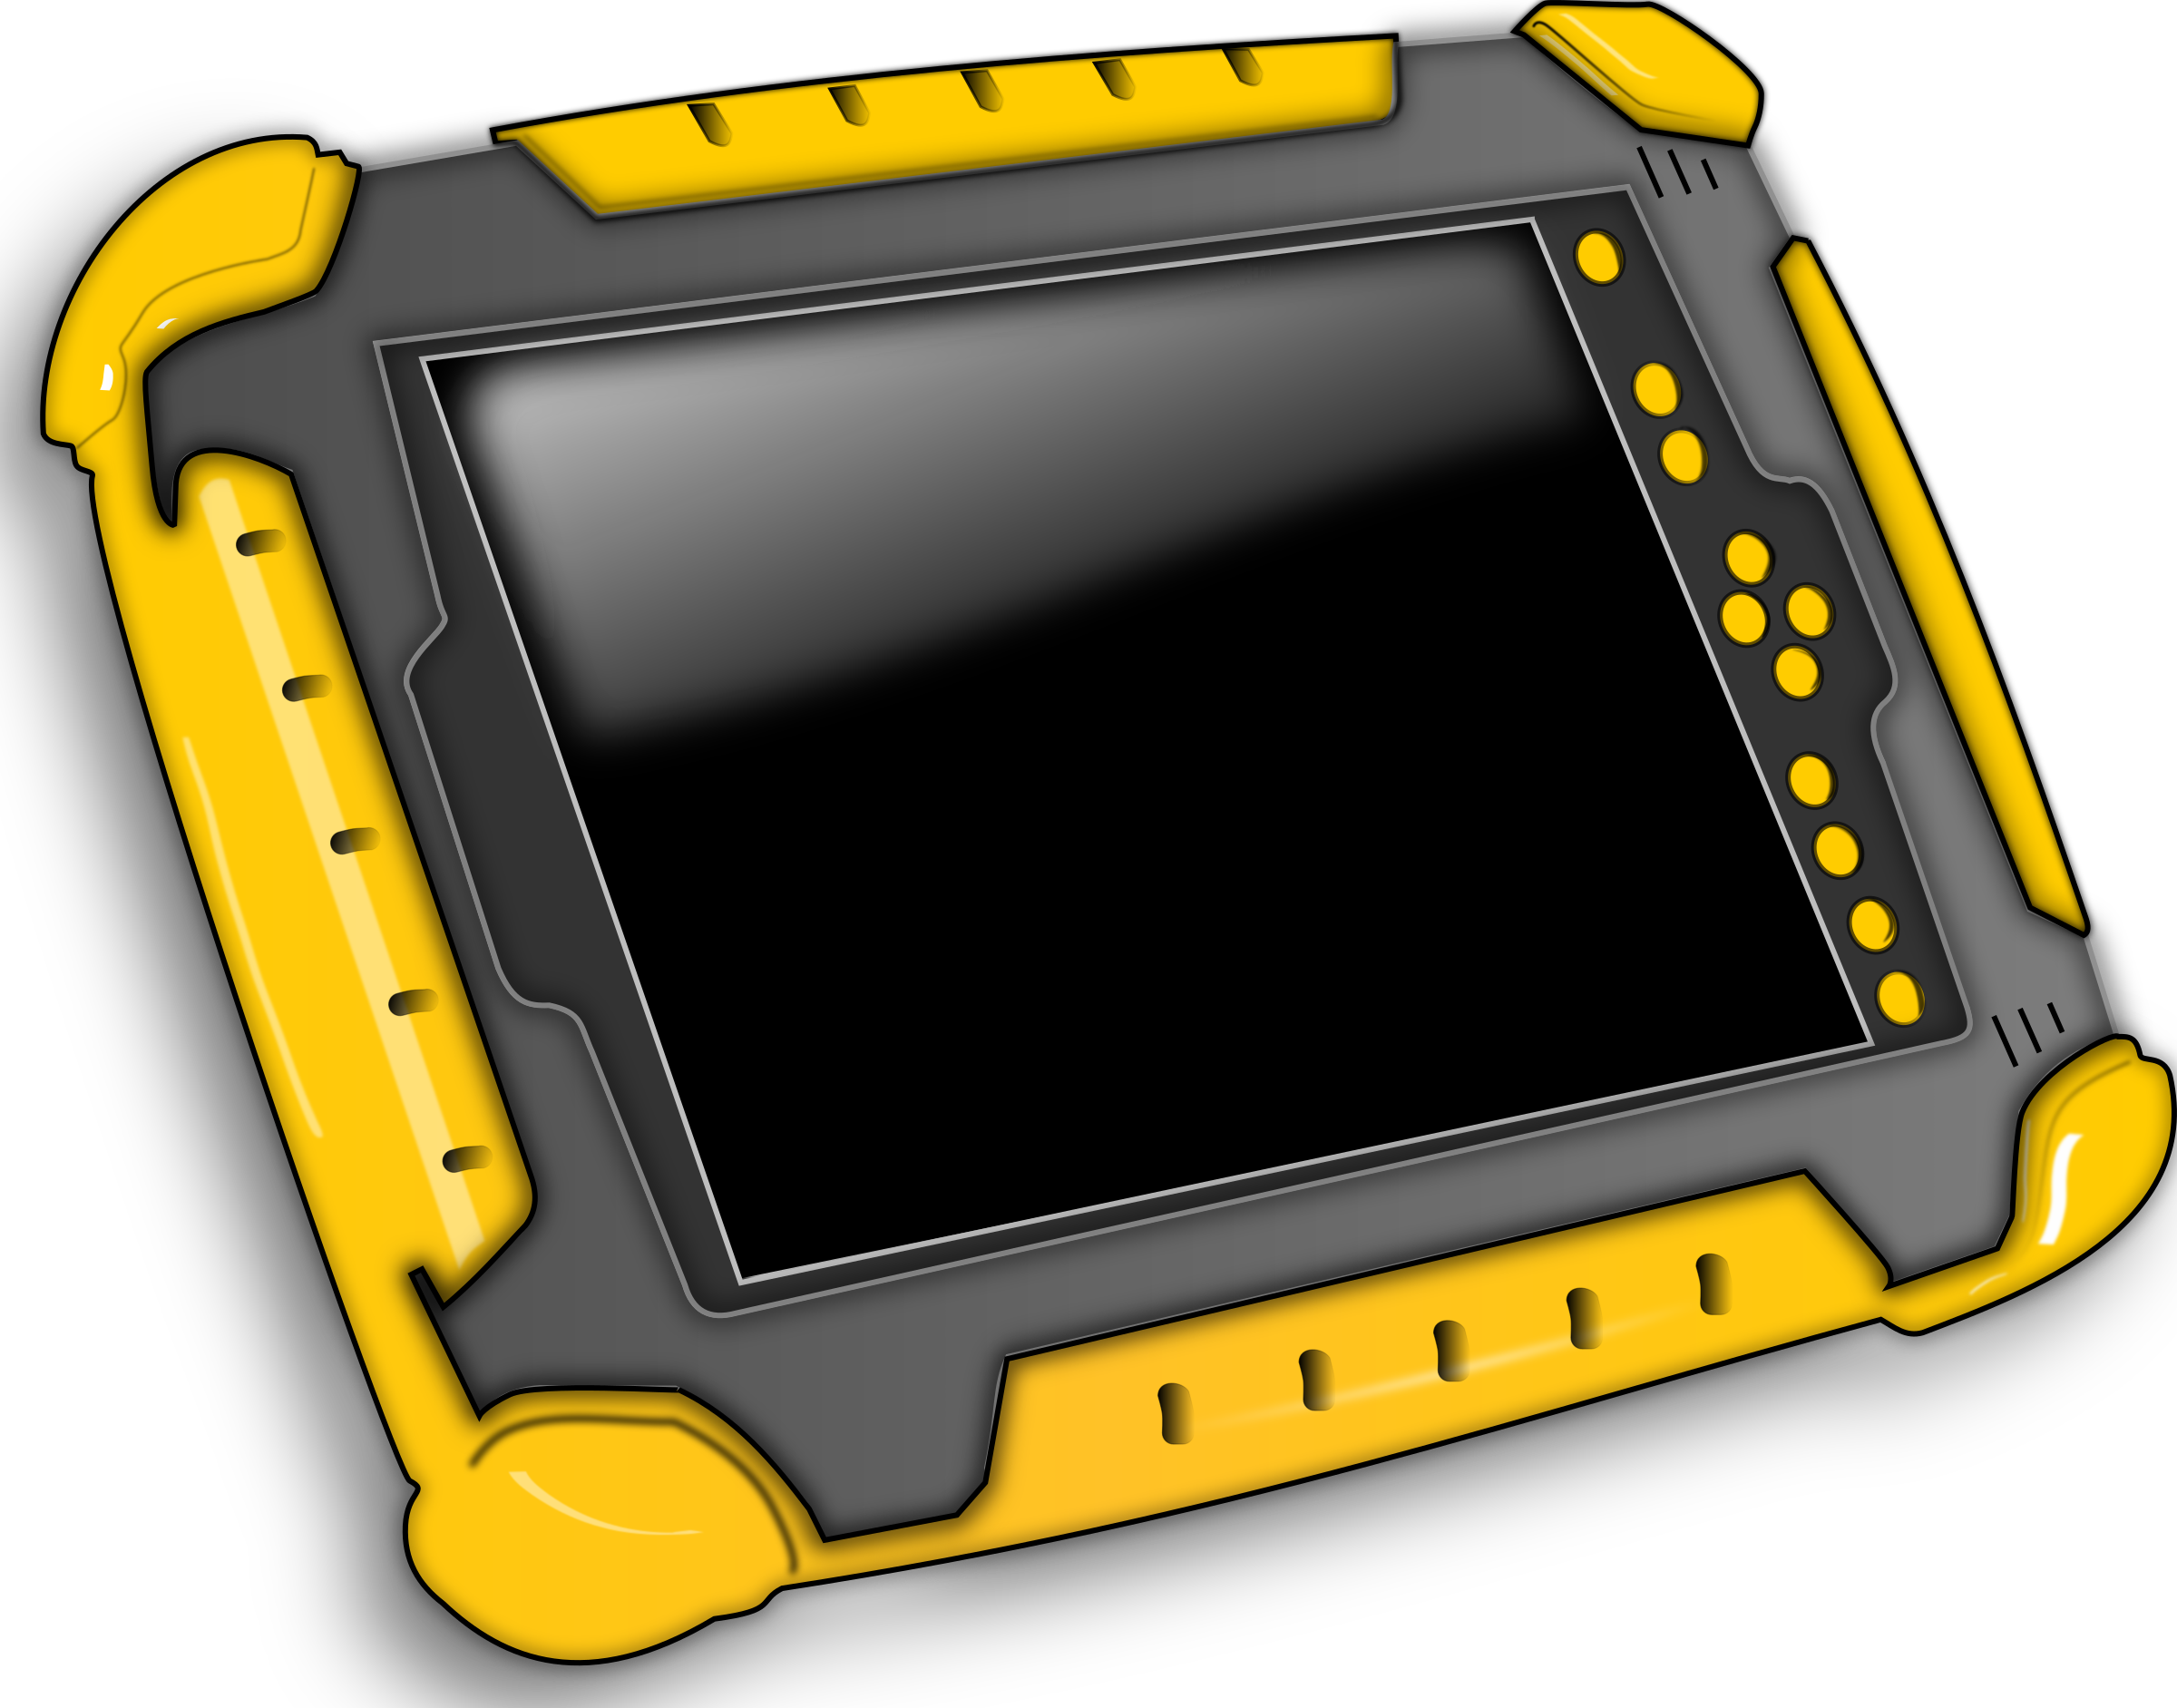 Rugged Industrial Tablet PNG image